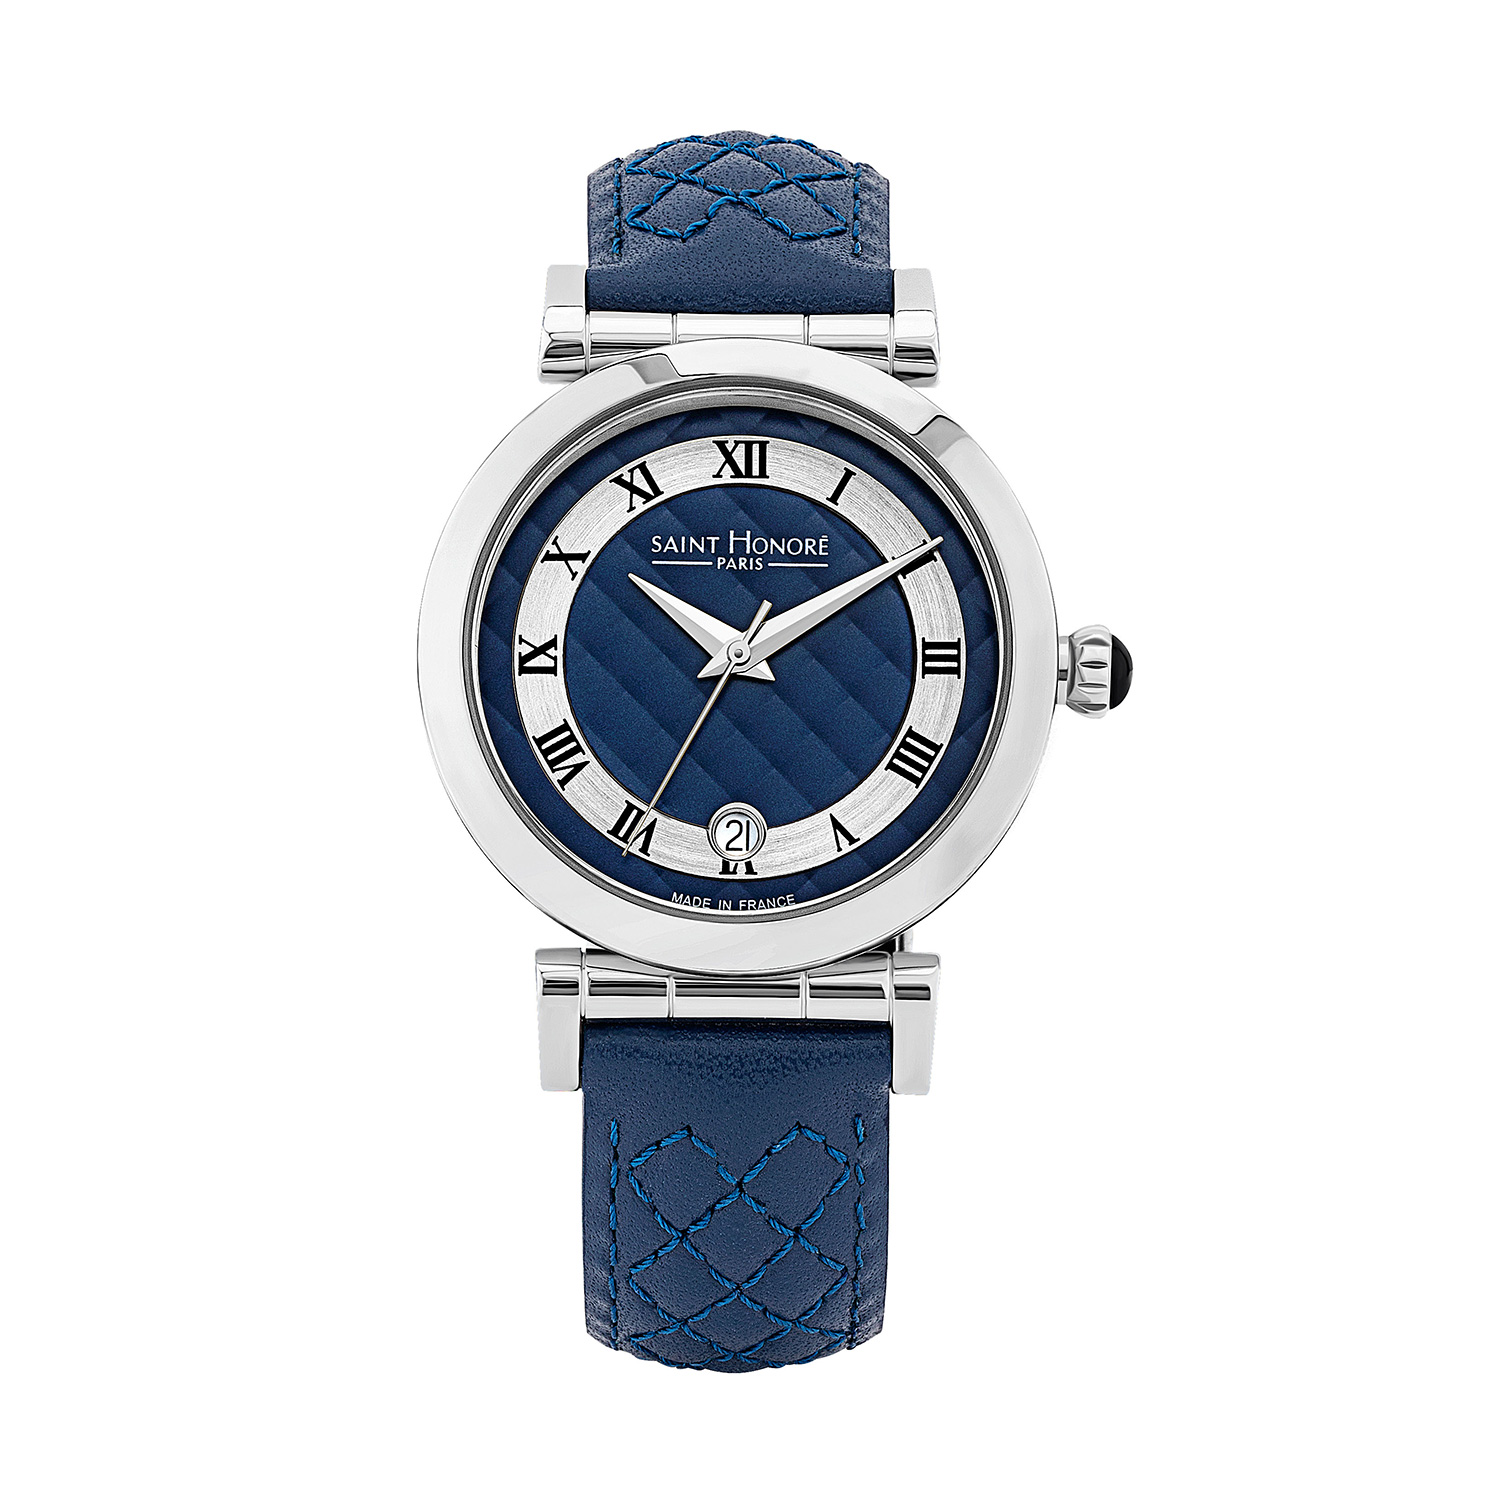 OPERA Women's watch - stainless steel, blue dial, blue leather strap